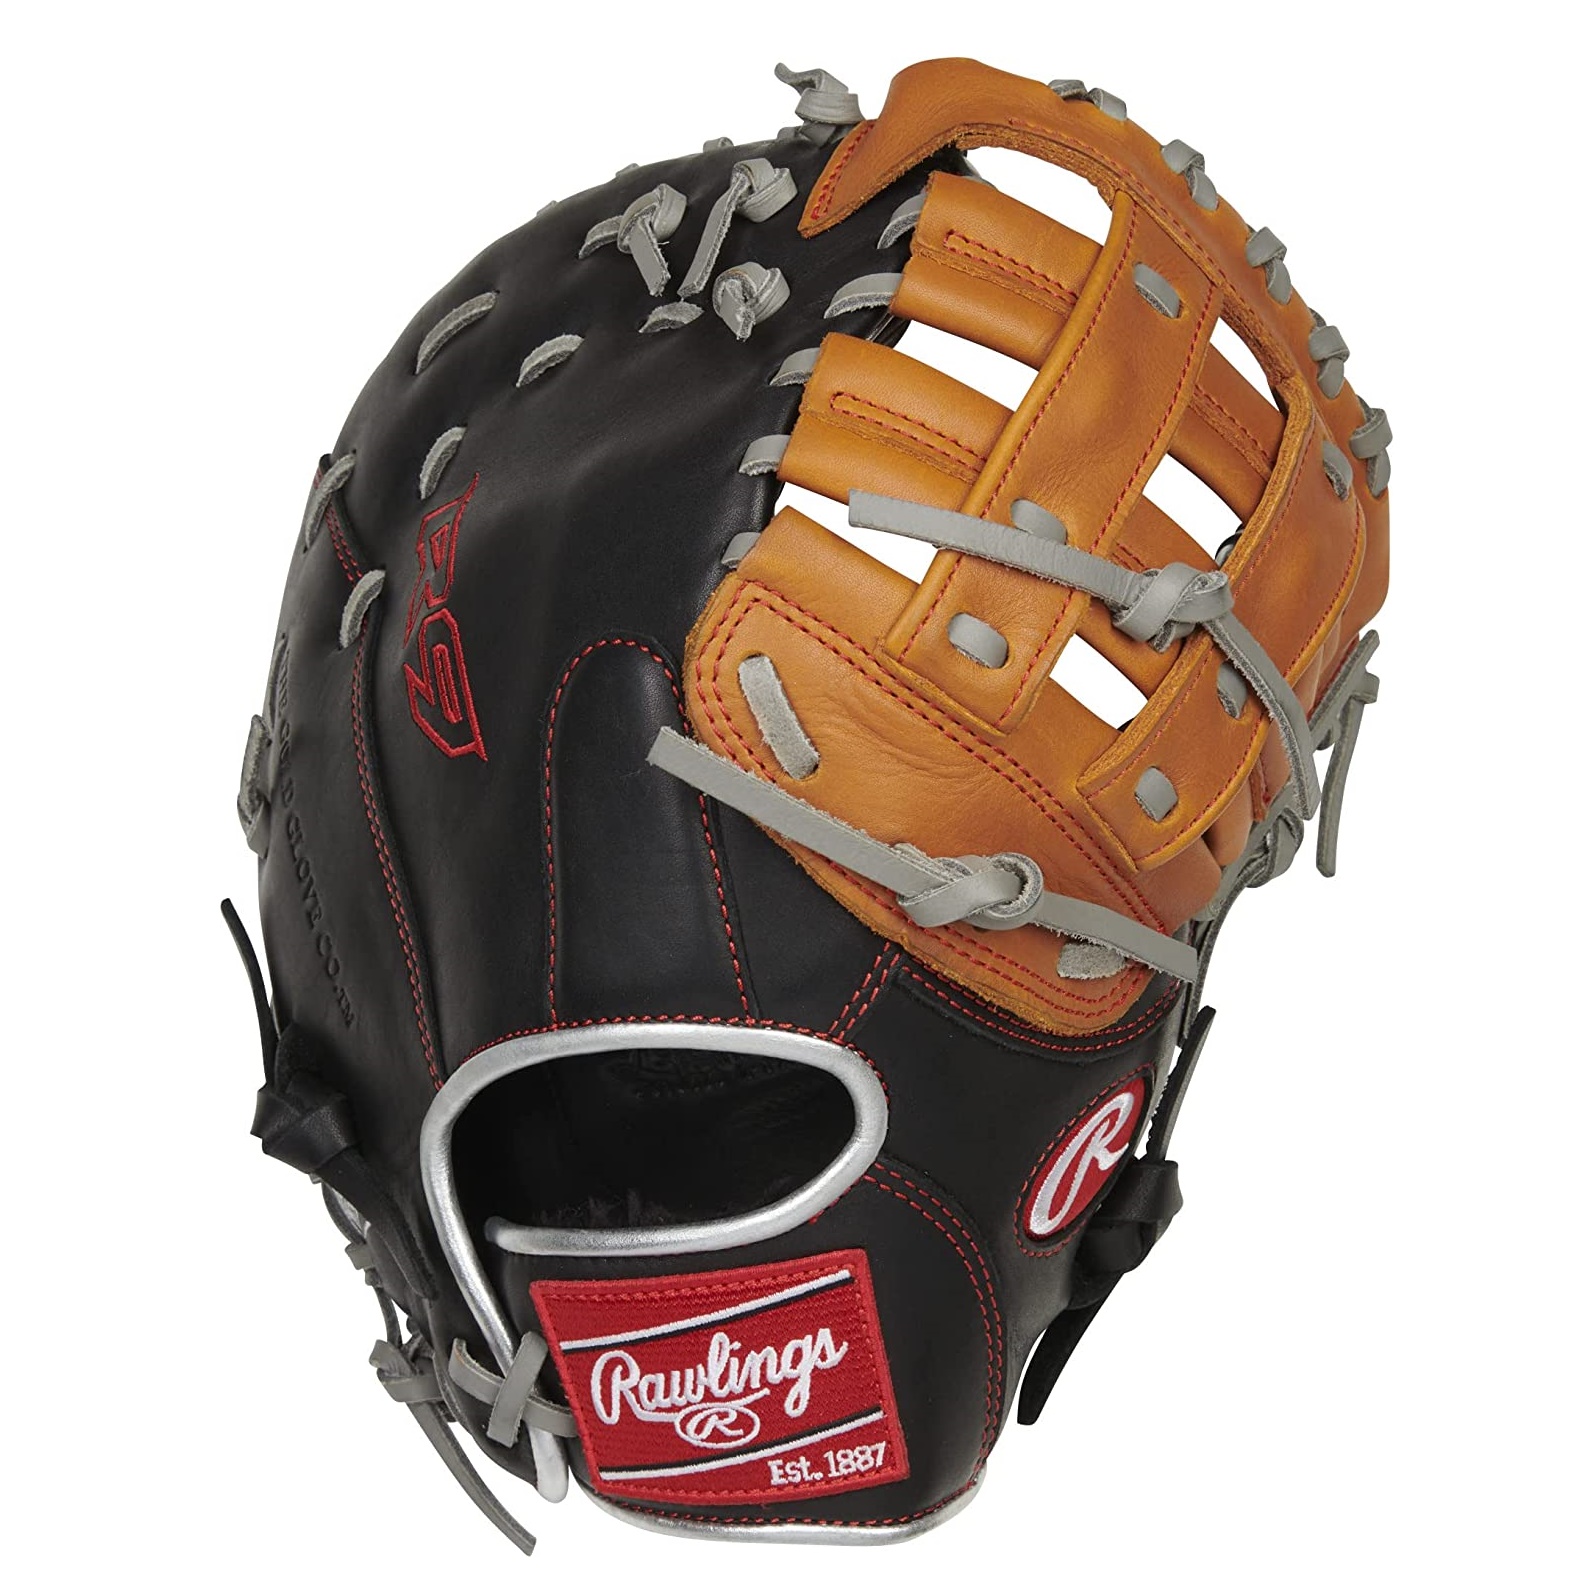 rawlings-r9-contour-baseball-first-base-mitt-12-inch-modified-pro-h-web-right-hand-throw R9FMU-17BT-RightHandThrow Rawlings  The R9 ContoUR 12-inch First Base Mitt is designed to give